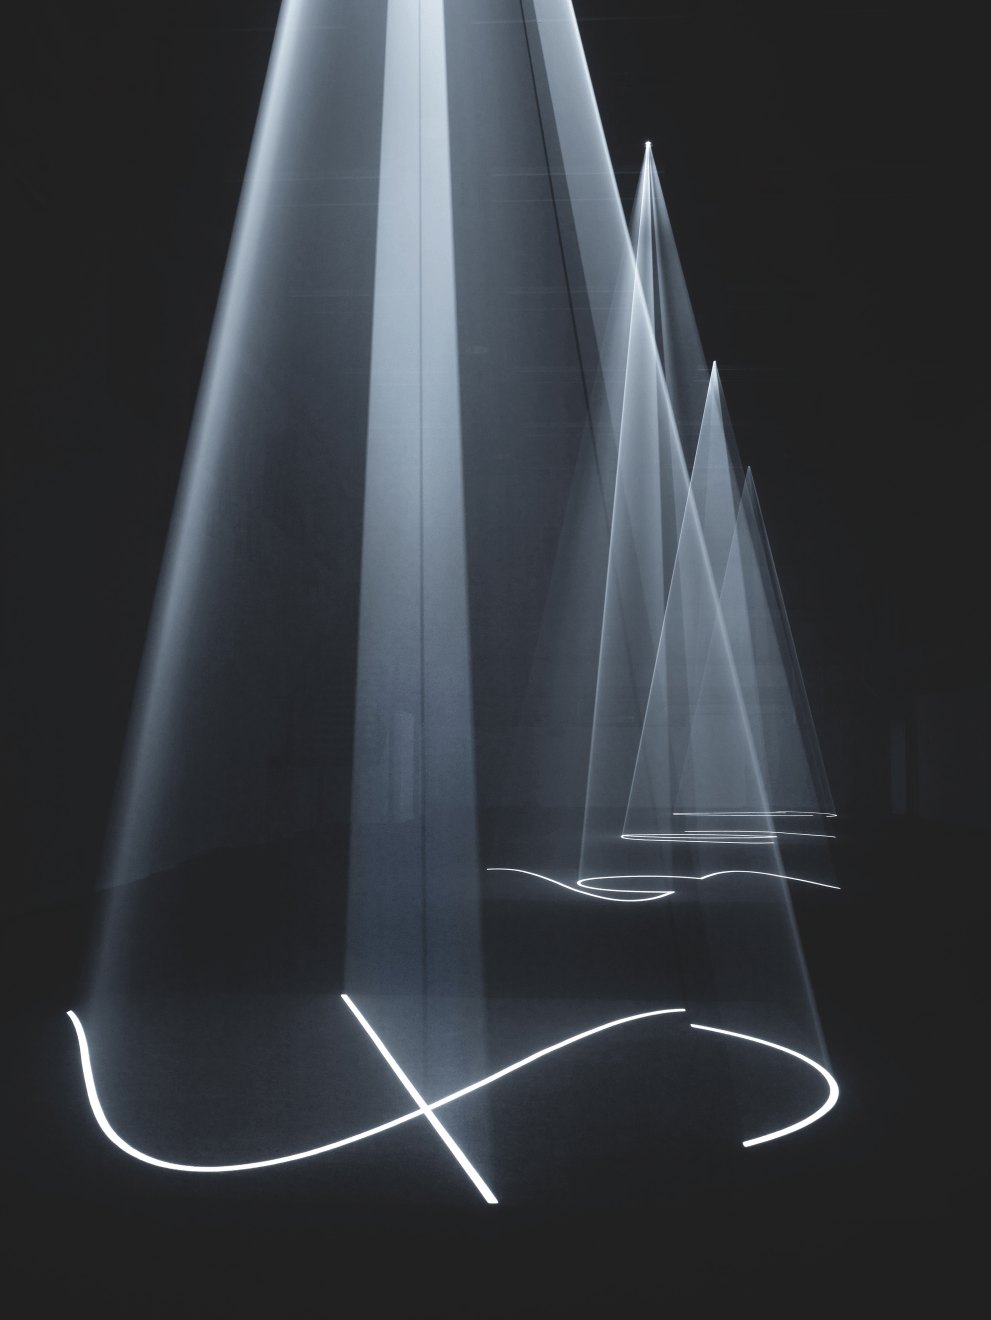 Anthony McCall and James White in Deceptive Images—Playing with Painting and Photography